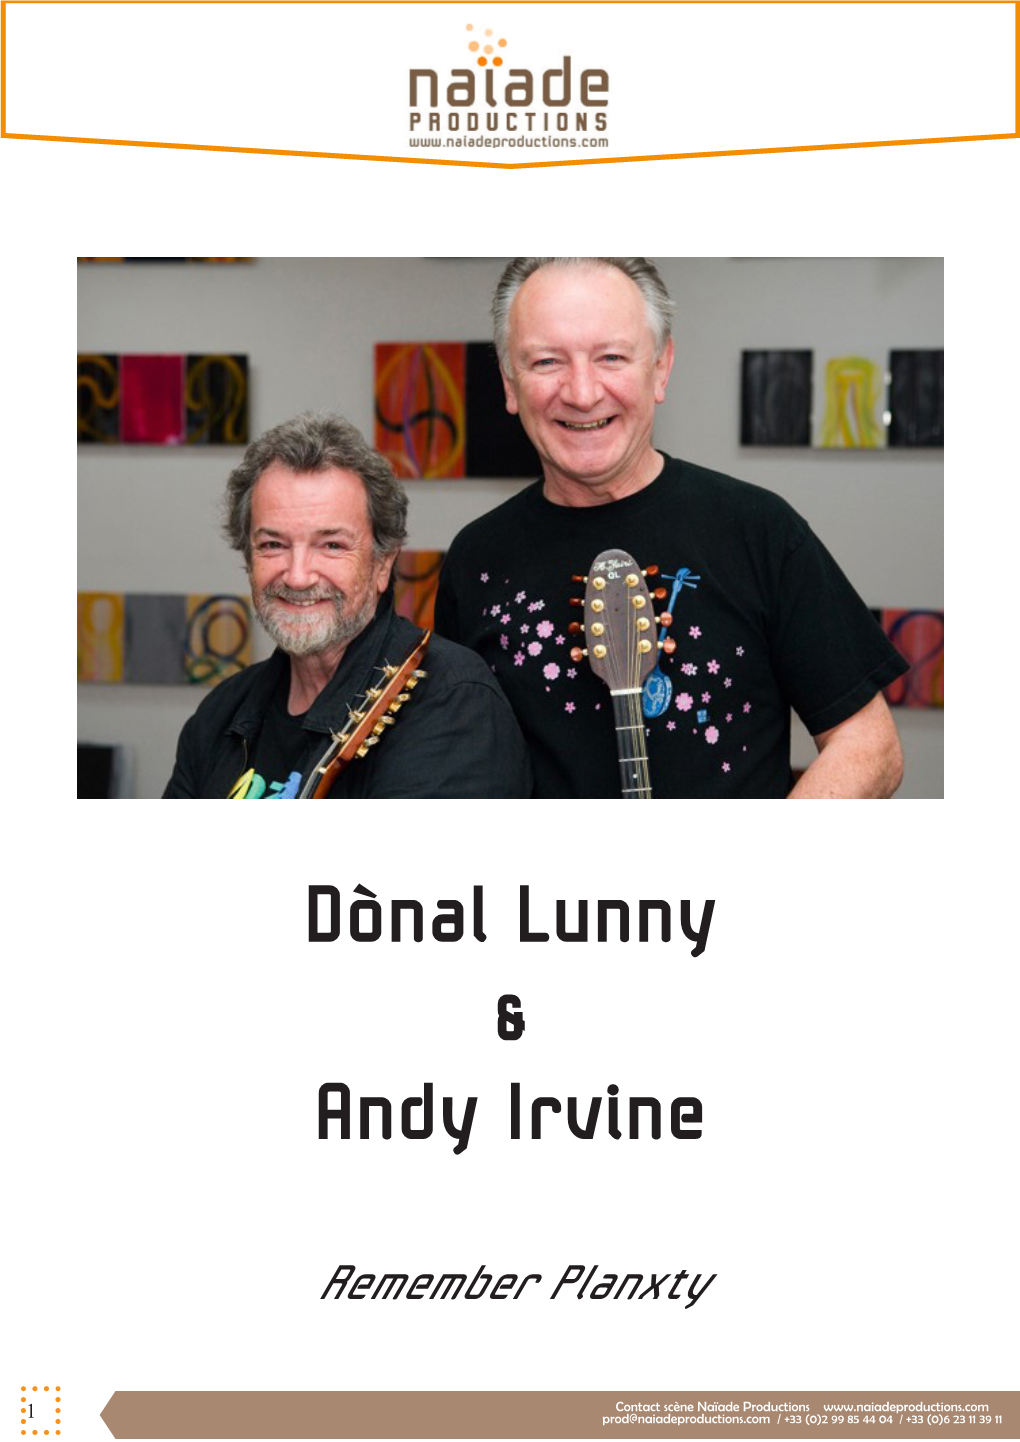 Dònal Lunny & Andy Irvine